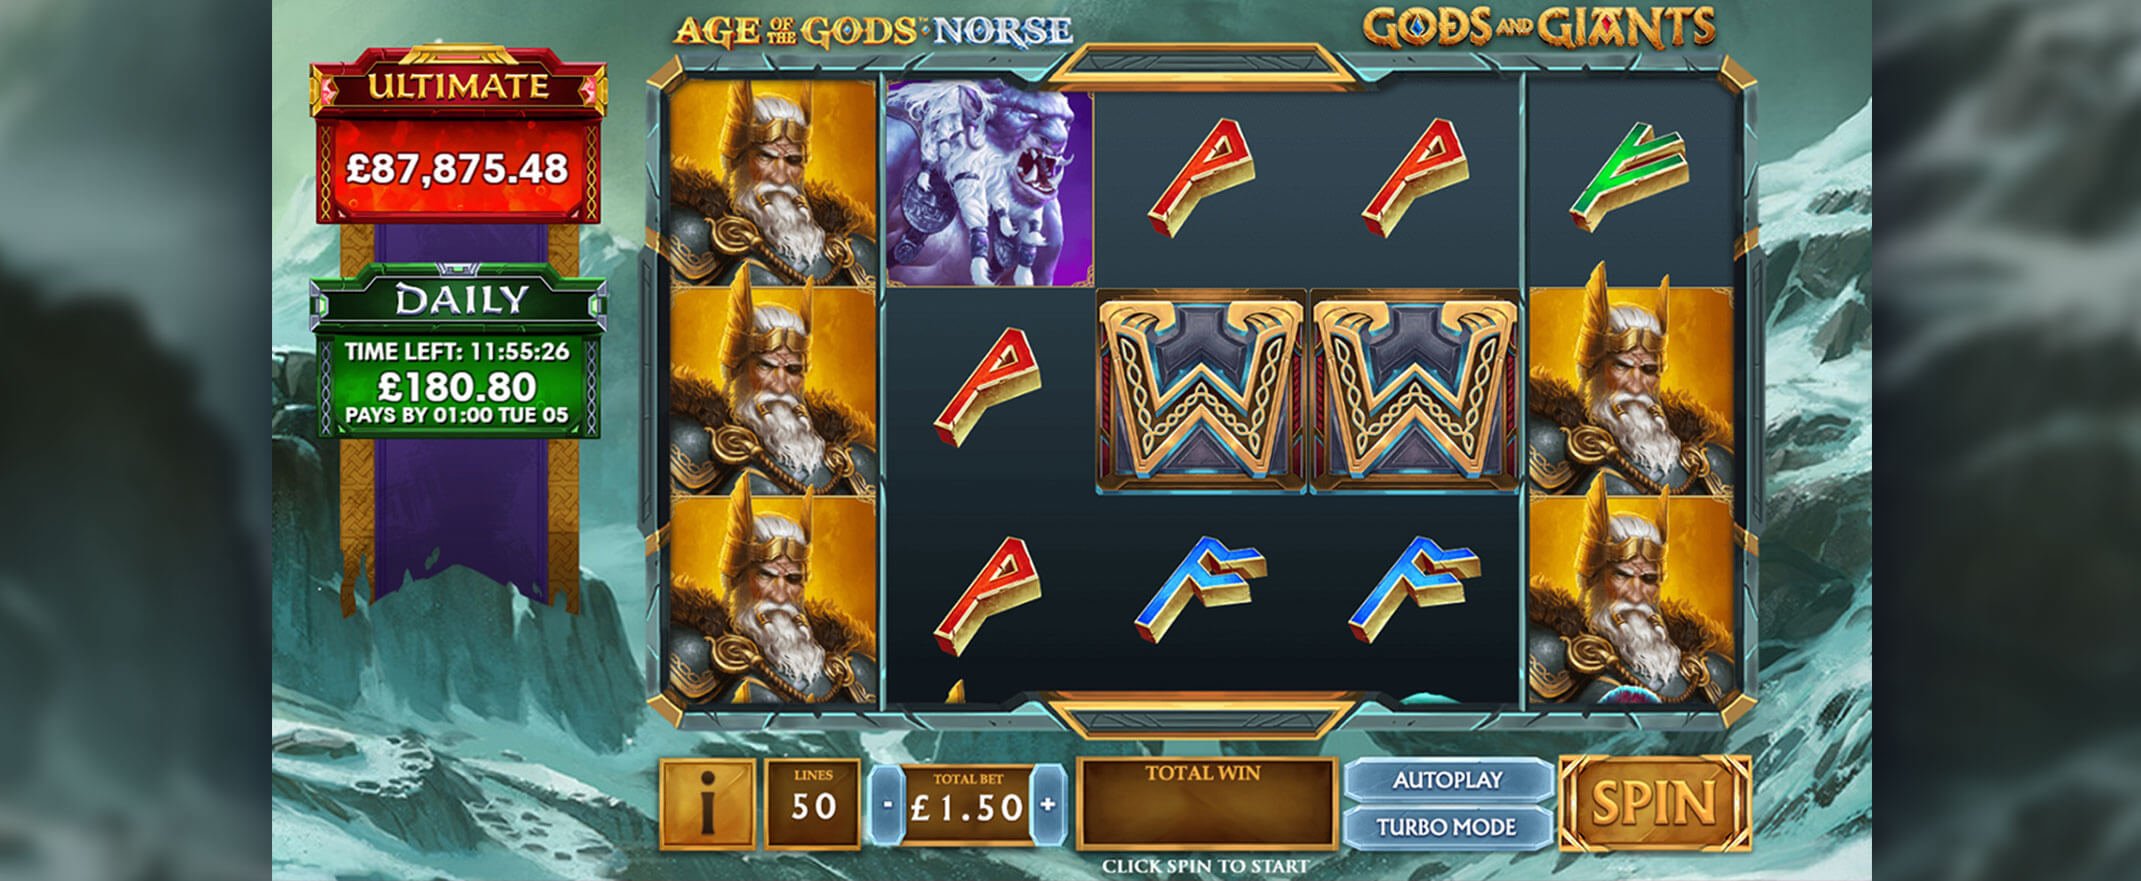 Age of the Gods Norse: Gods and Giants Spielautomaten Bewertung